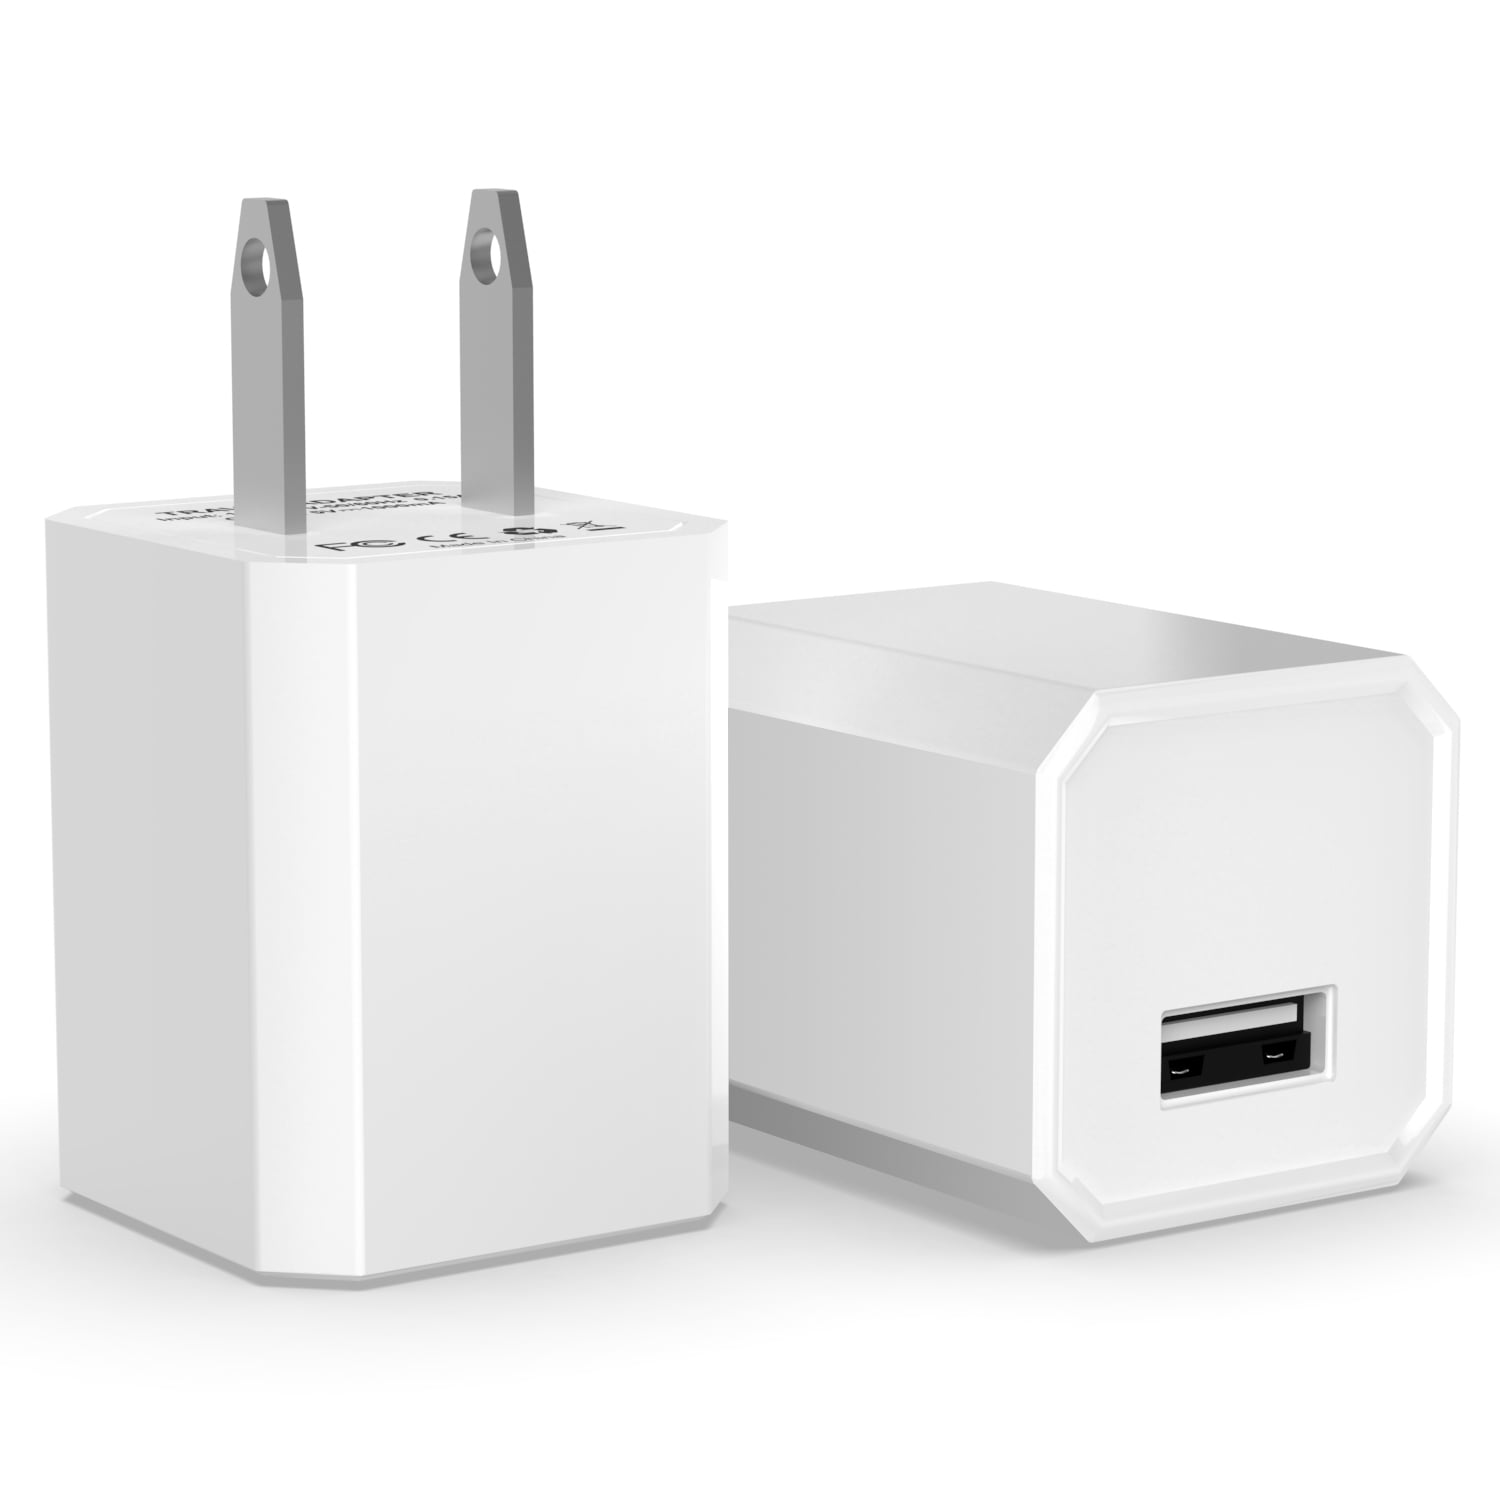 [2-Pack] USB Charger Cubes, Wall Charger Plug, 1A Single Port USB ...